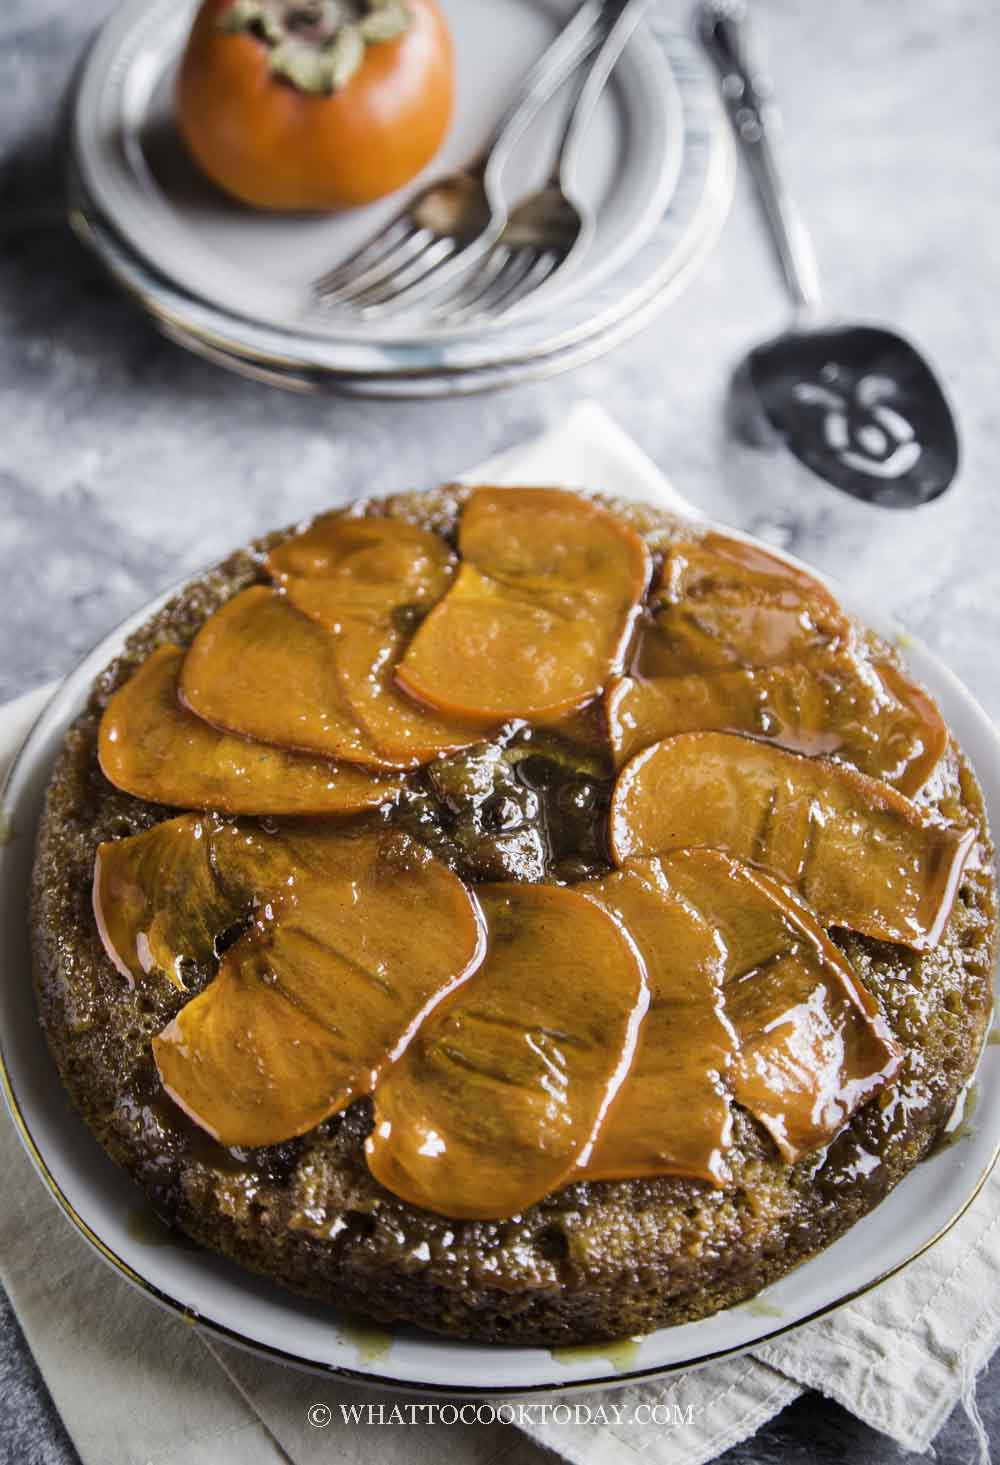 Chinese Five-Spice Caramel Persimmon Upside-Down Cake